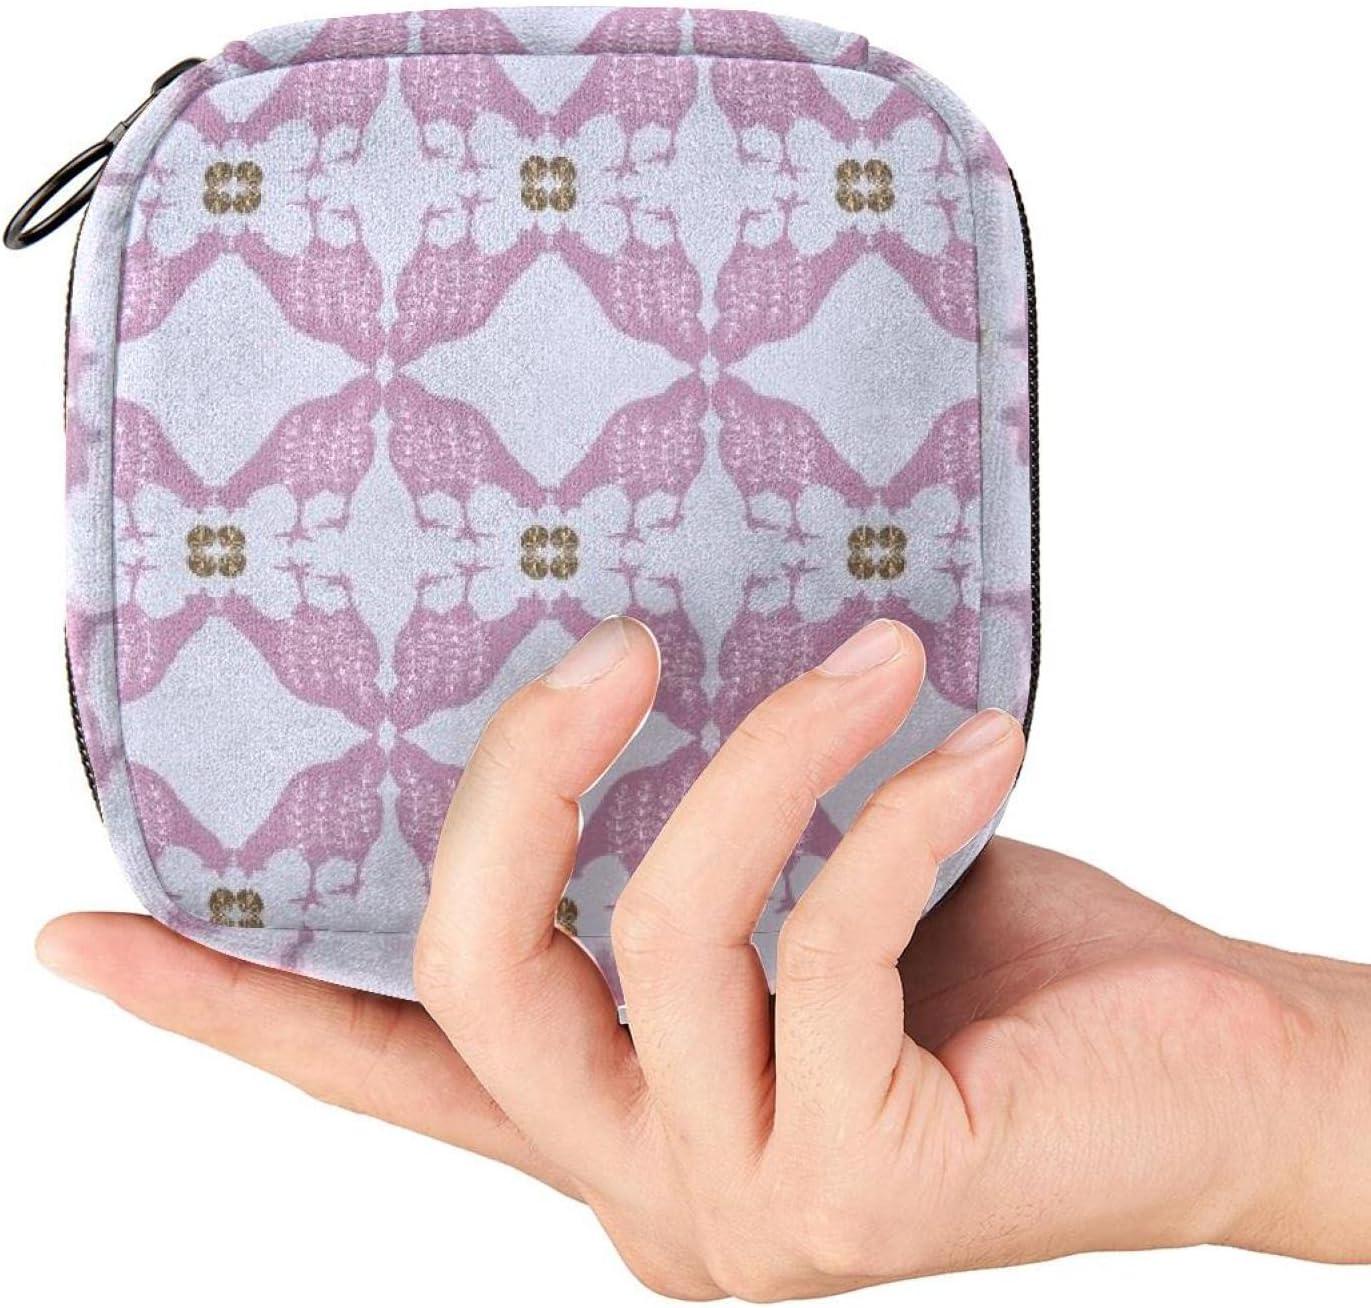 Nordic Animal Period Pouch Portable Tampon Storage Bag for Sanitary Napkins Tampon  Holder for Purse Feminine